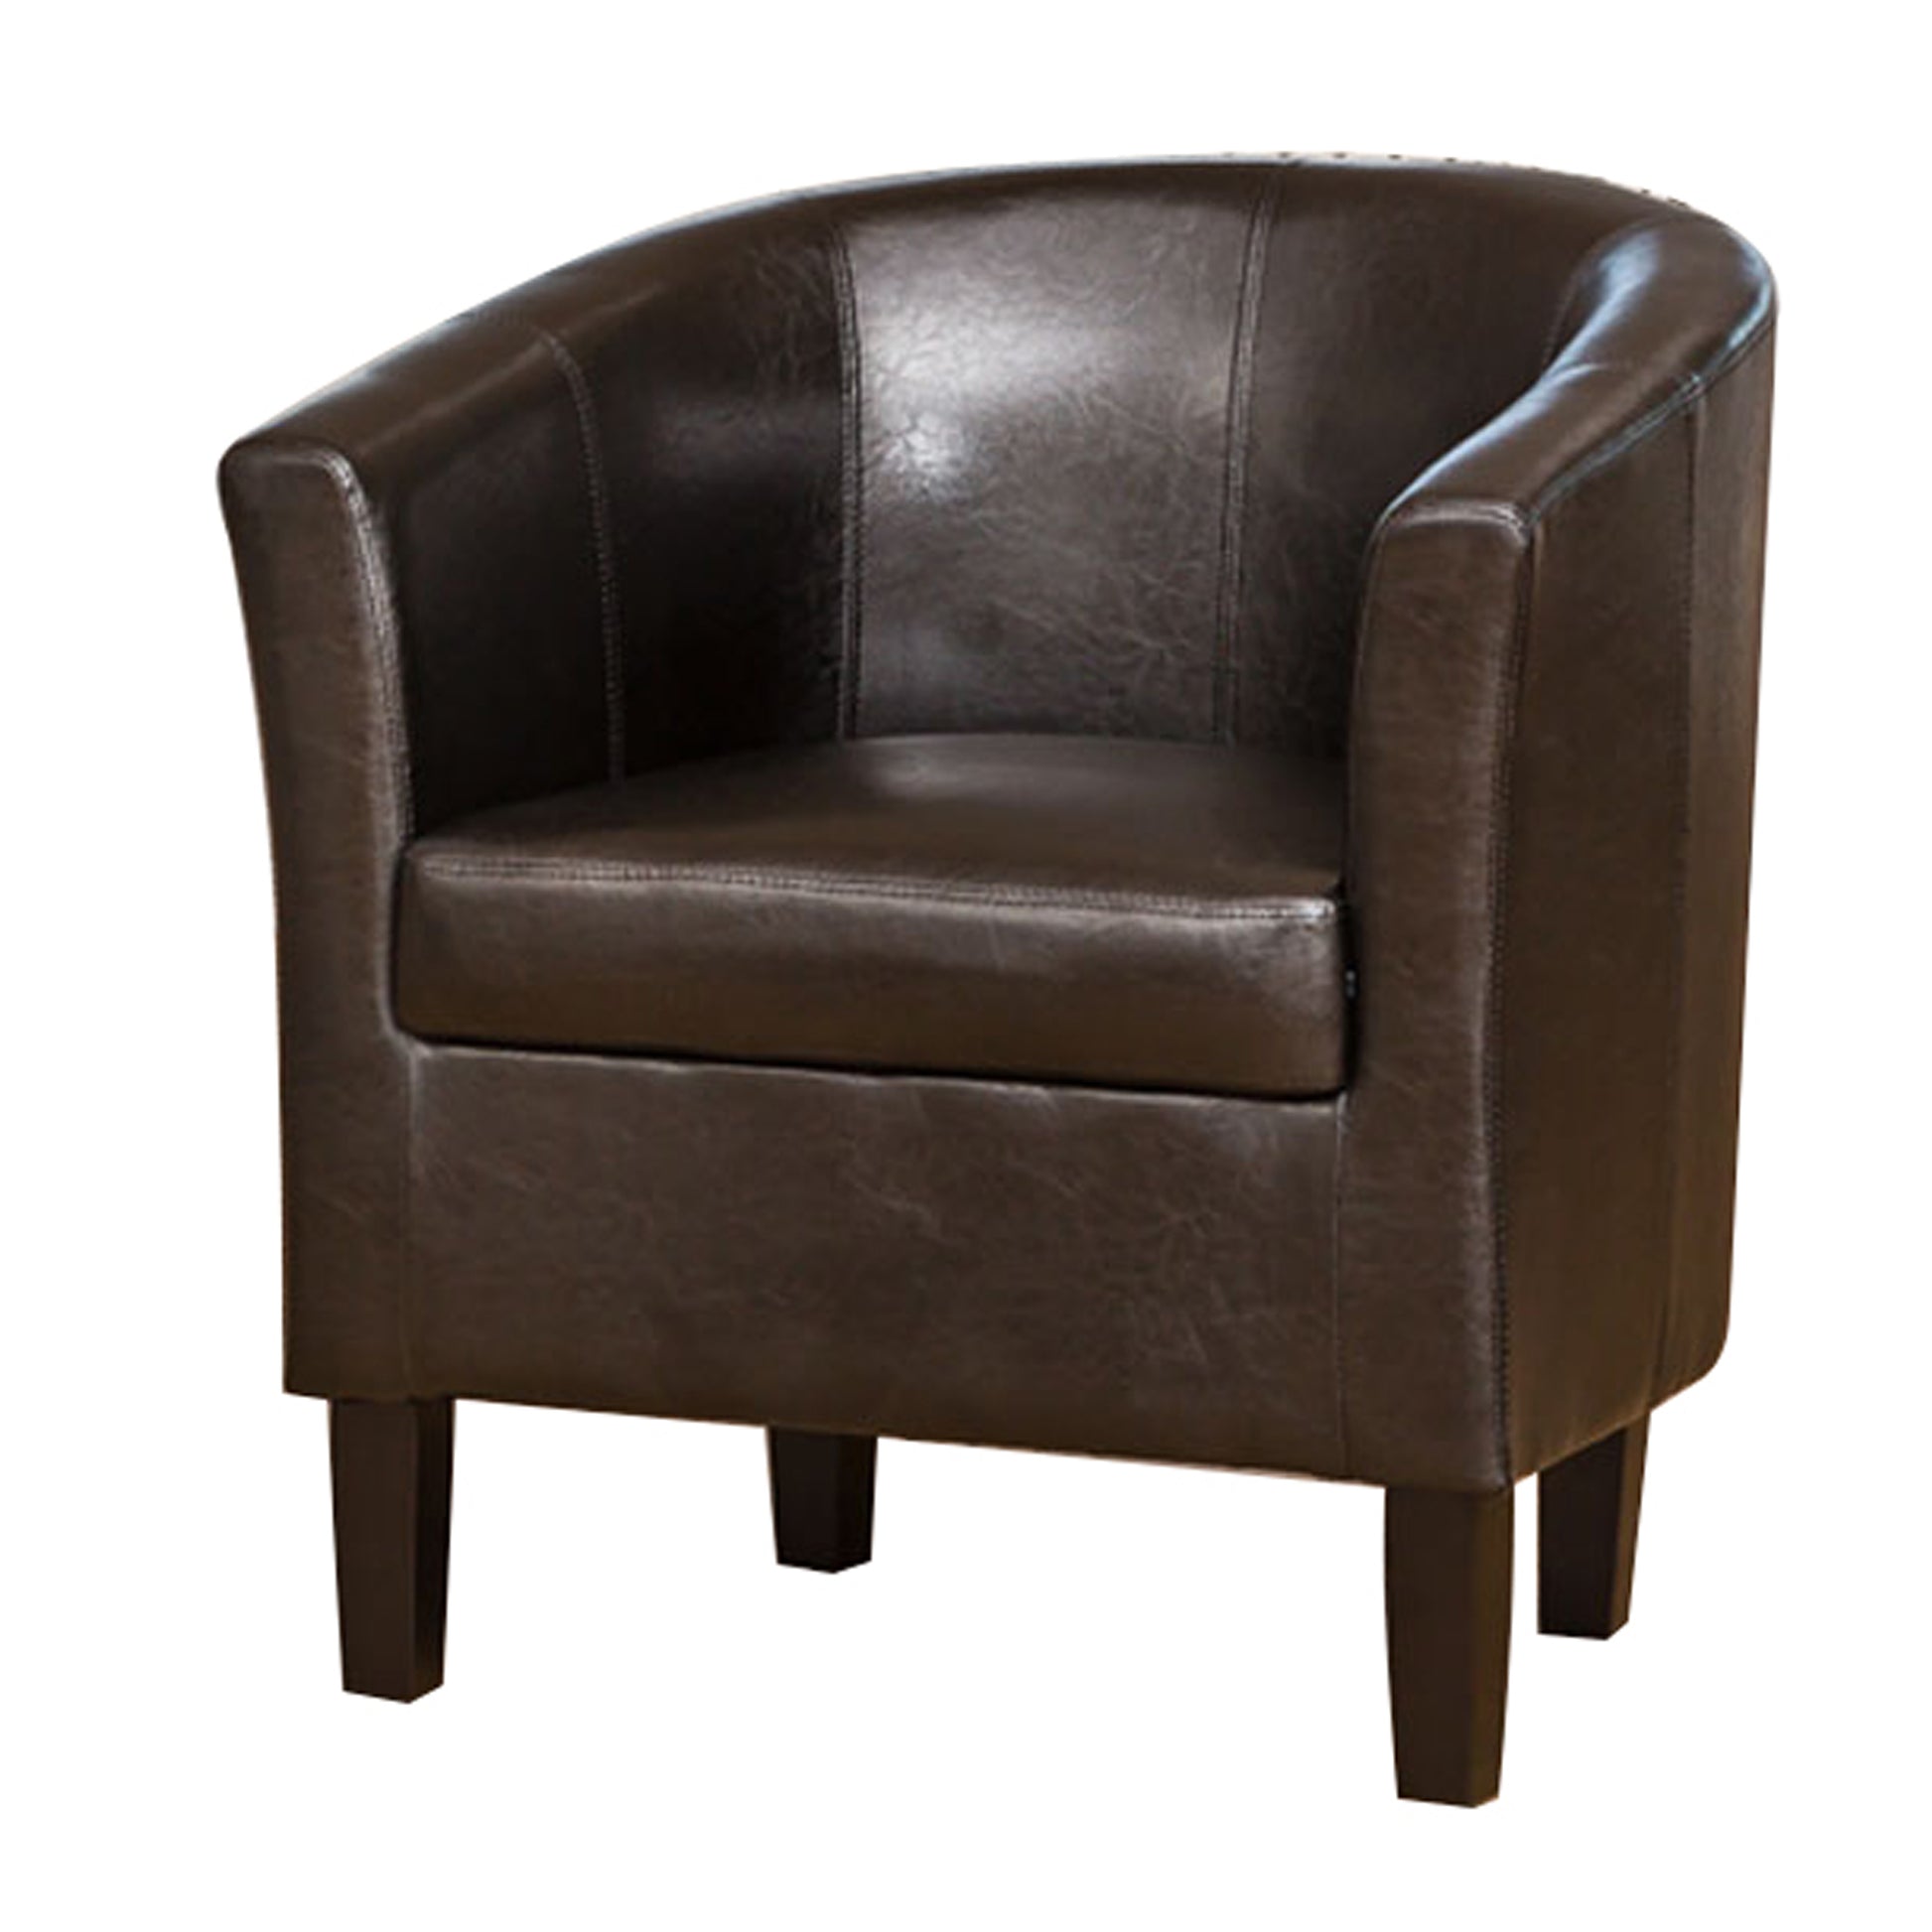 Tub Arm Chair 1 2 or 3 Seat Home Use in black, brown, red or cream. - CasaFenix